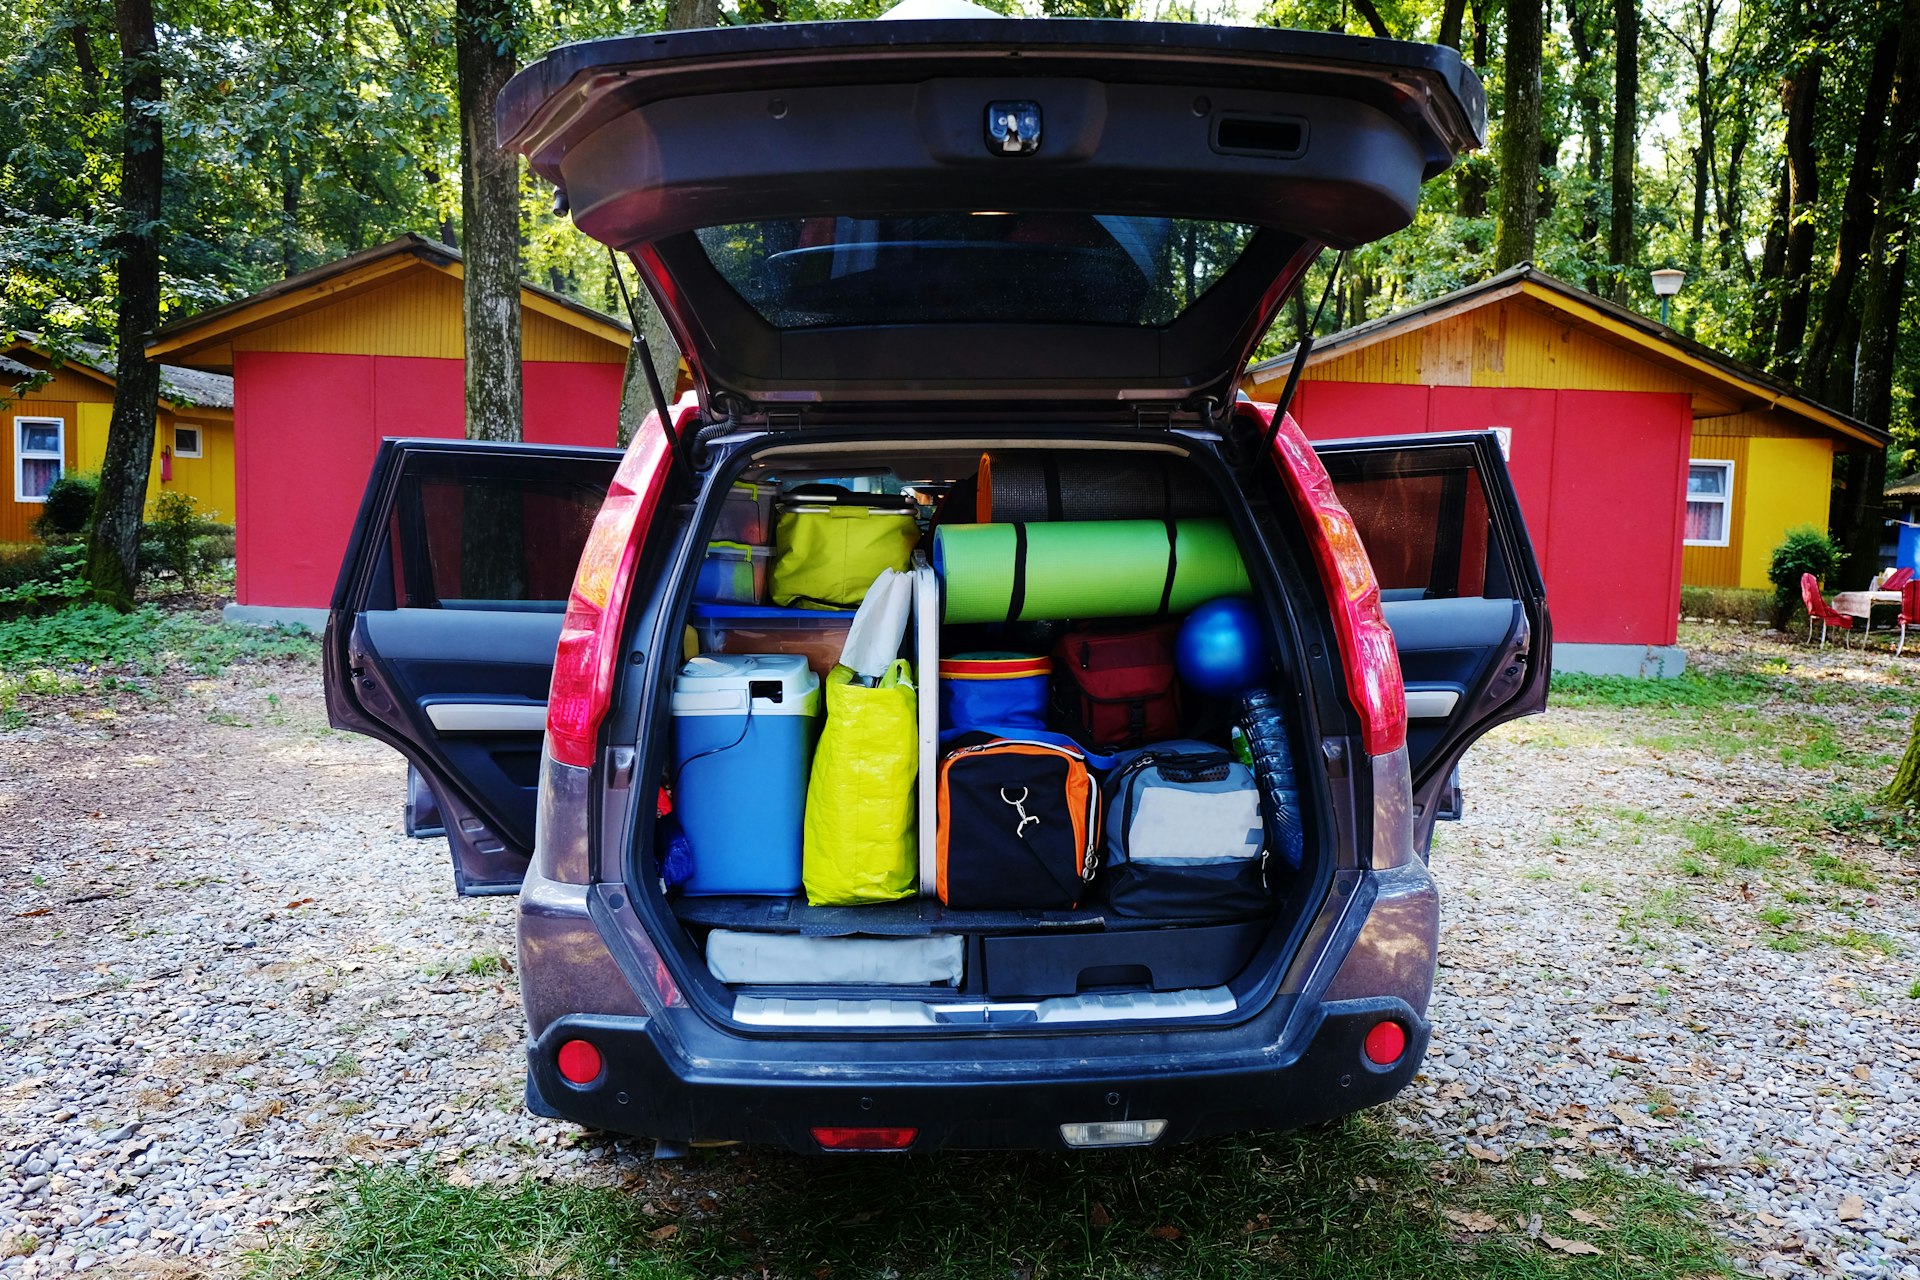 The open trunk of a car, packed full of luggage